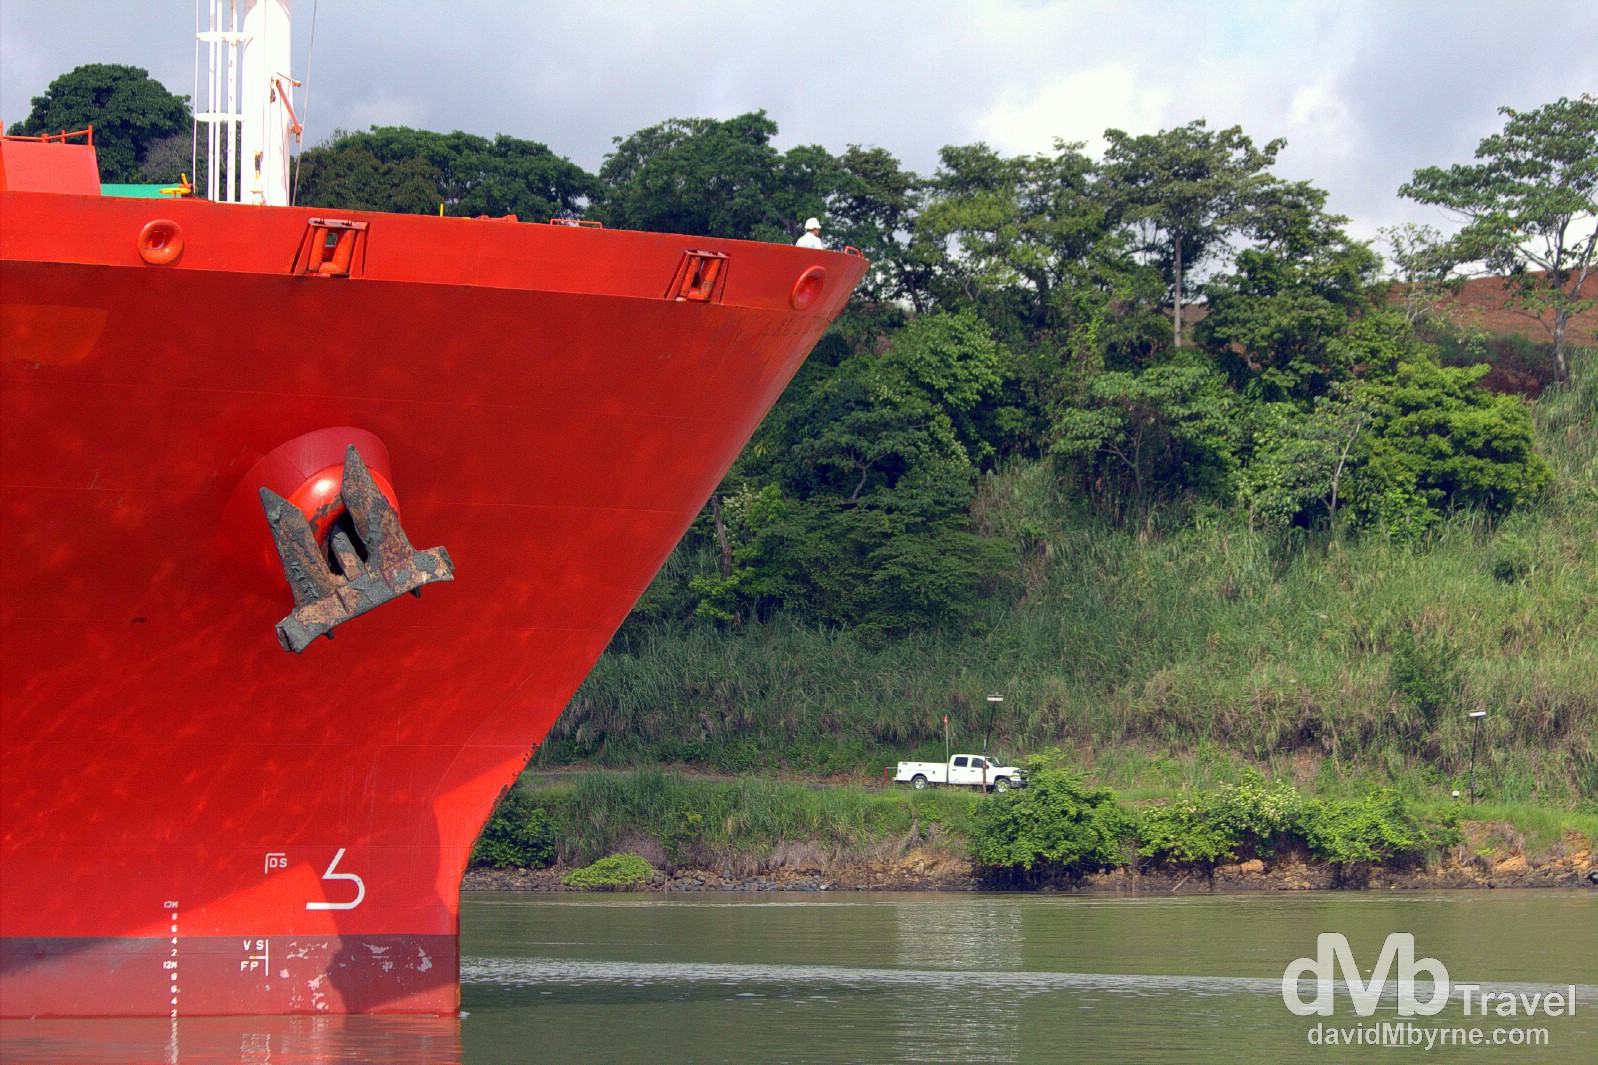 A cargo ship on the final approach to the Miraflores Locks of the Panama Canal, Panama. July 1st 2013.